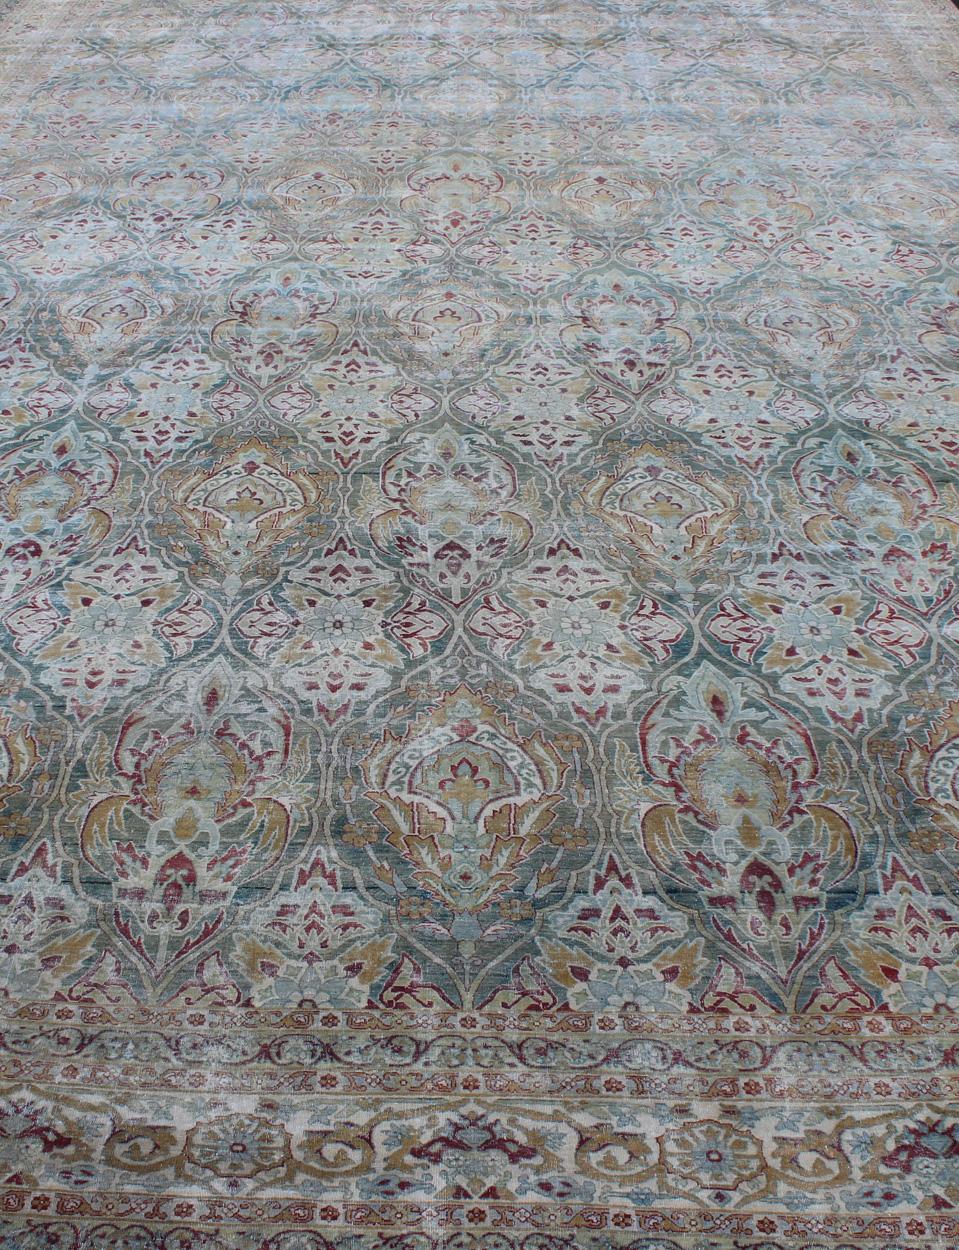 Very Large Antique Persian Distressed Lavar Kerman Rug In Large Scale Design For Sale 4